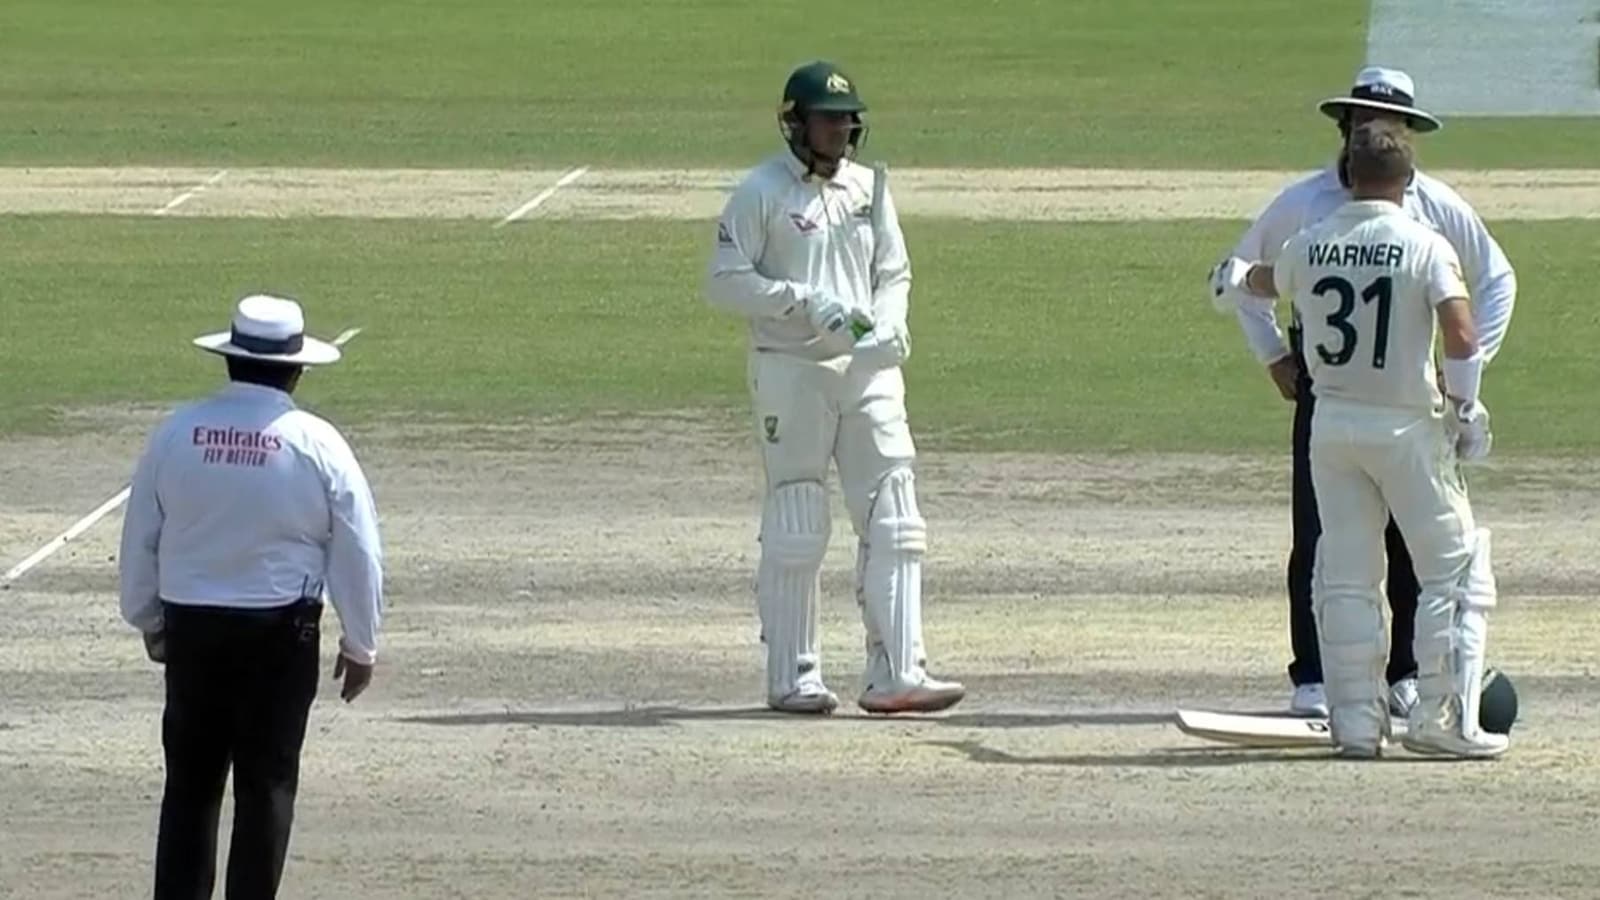 ‘Show me the rule book. I won’t start until you do’: Stump mic captures Warner’s heated exchange with umpire – WATCH